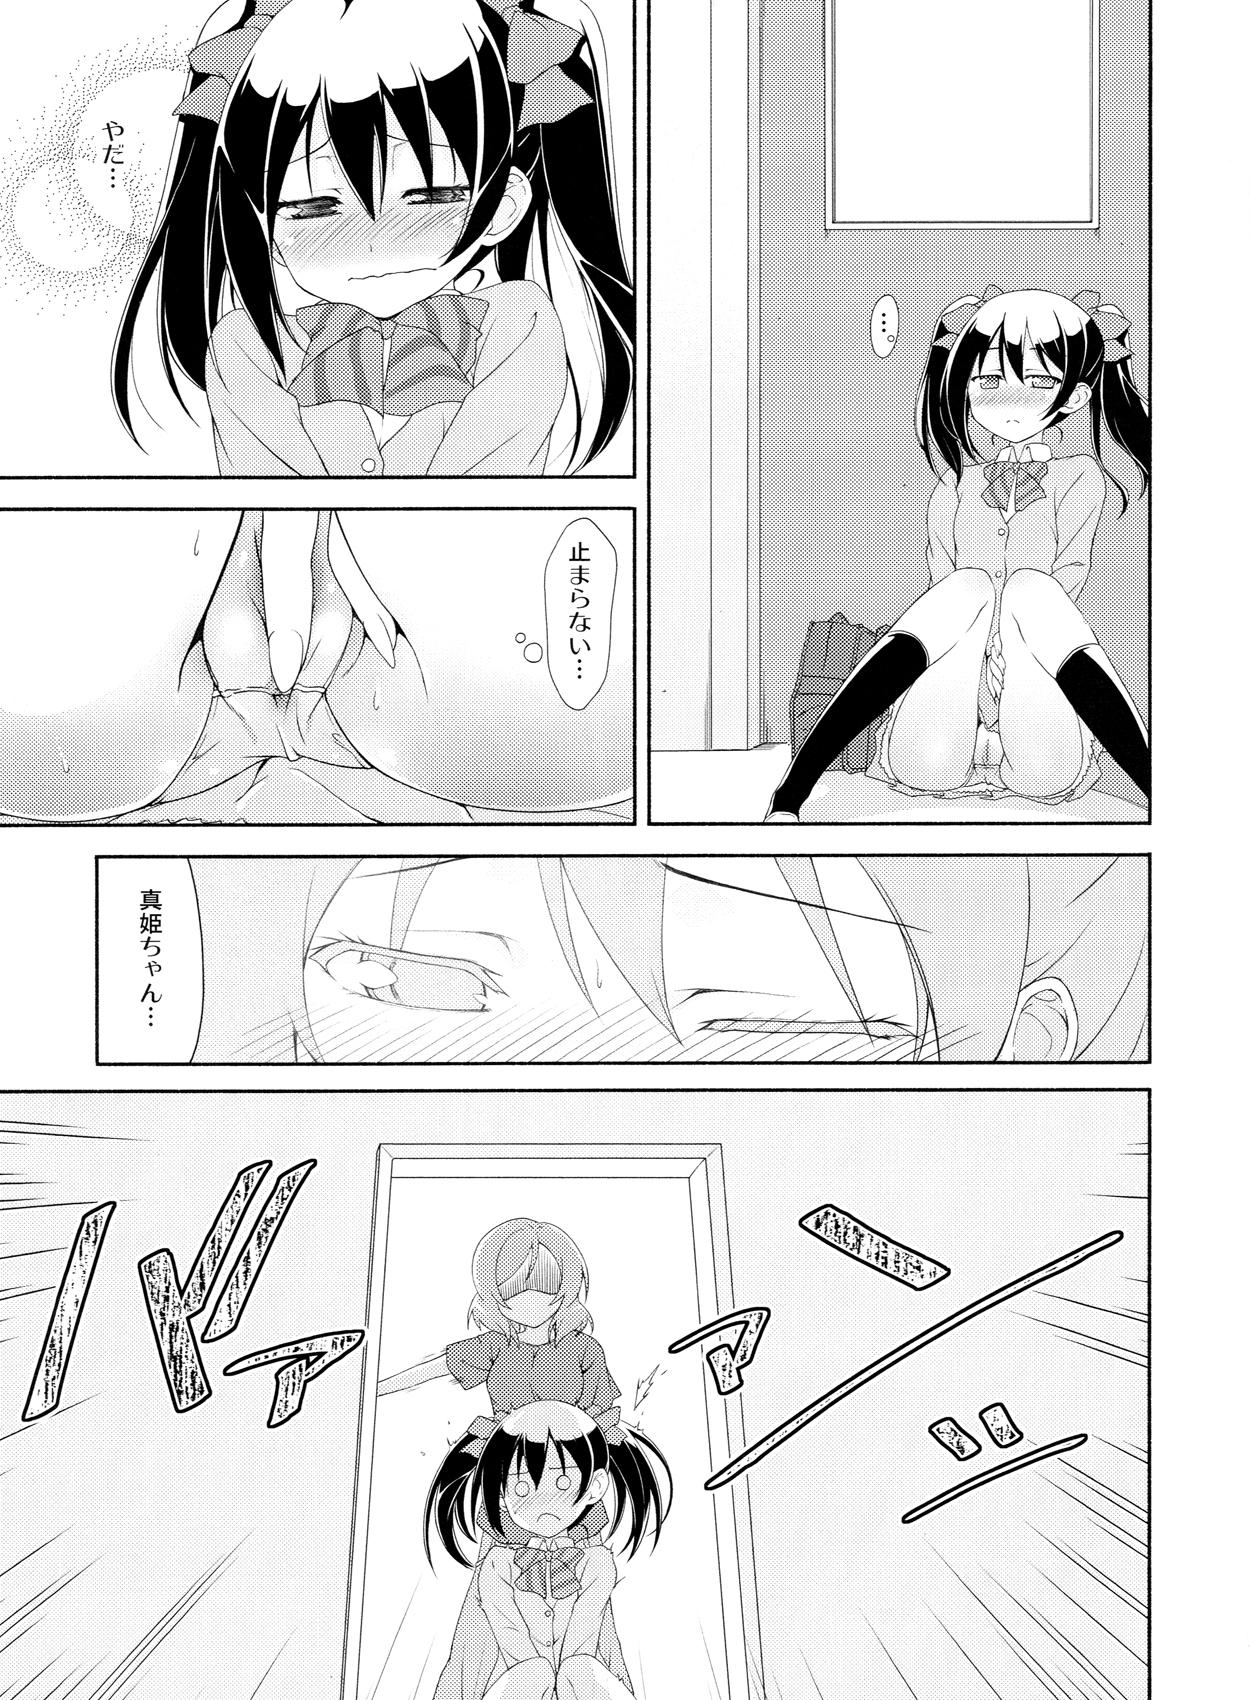 Chat Love White - Love live Family Taboo - Page 6